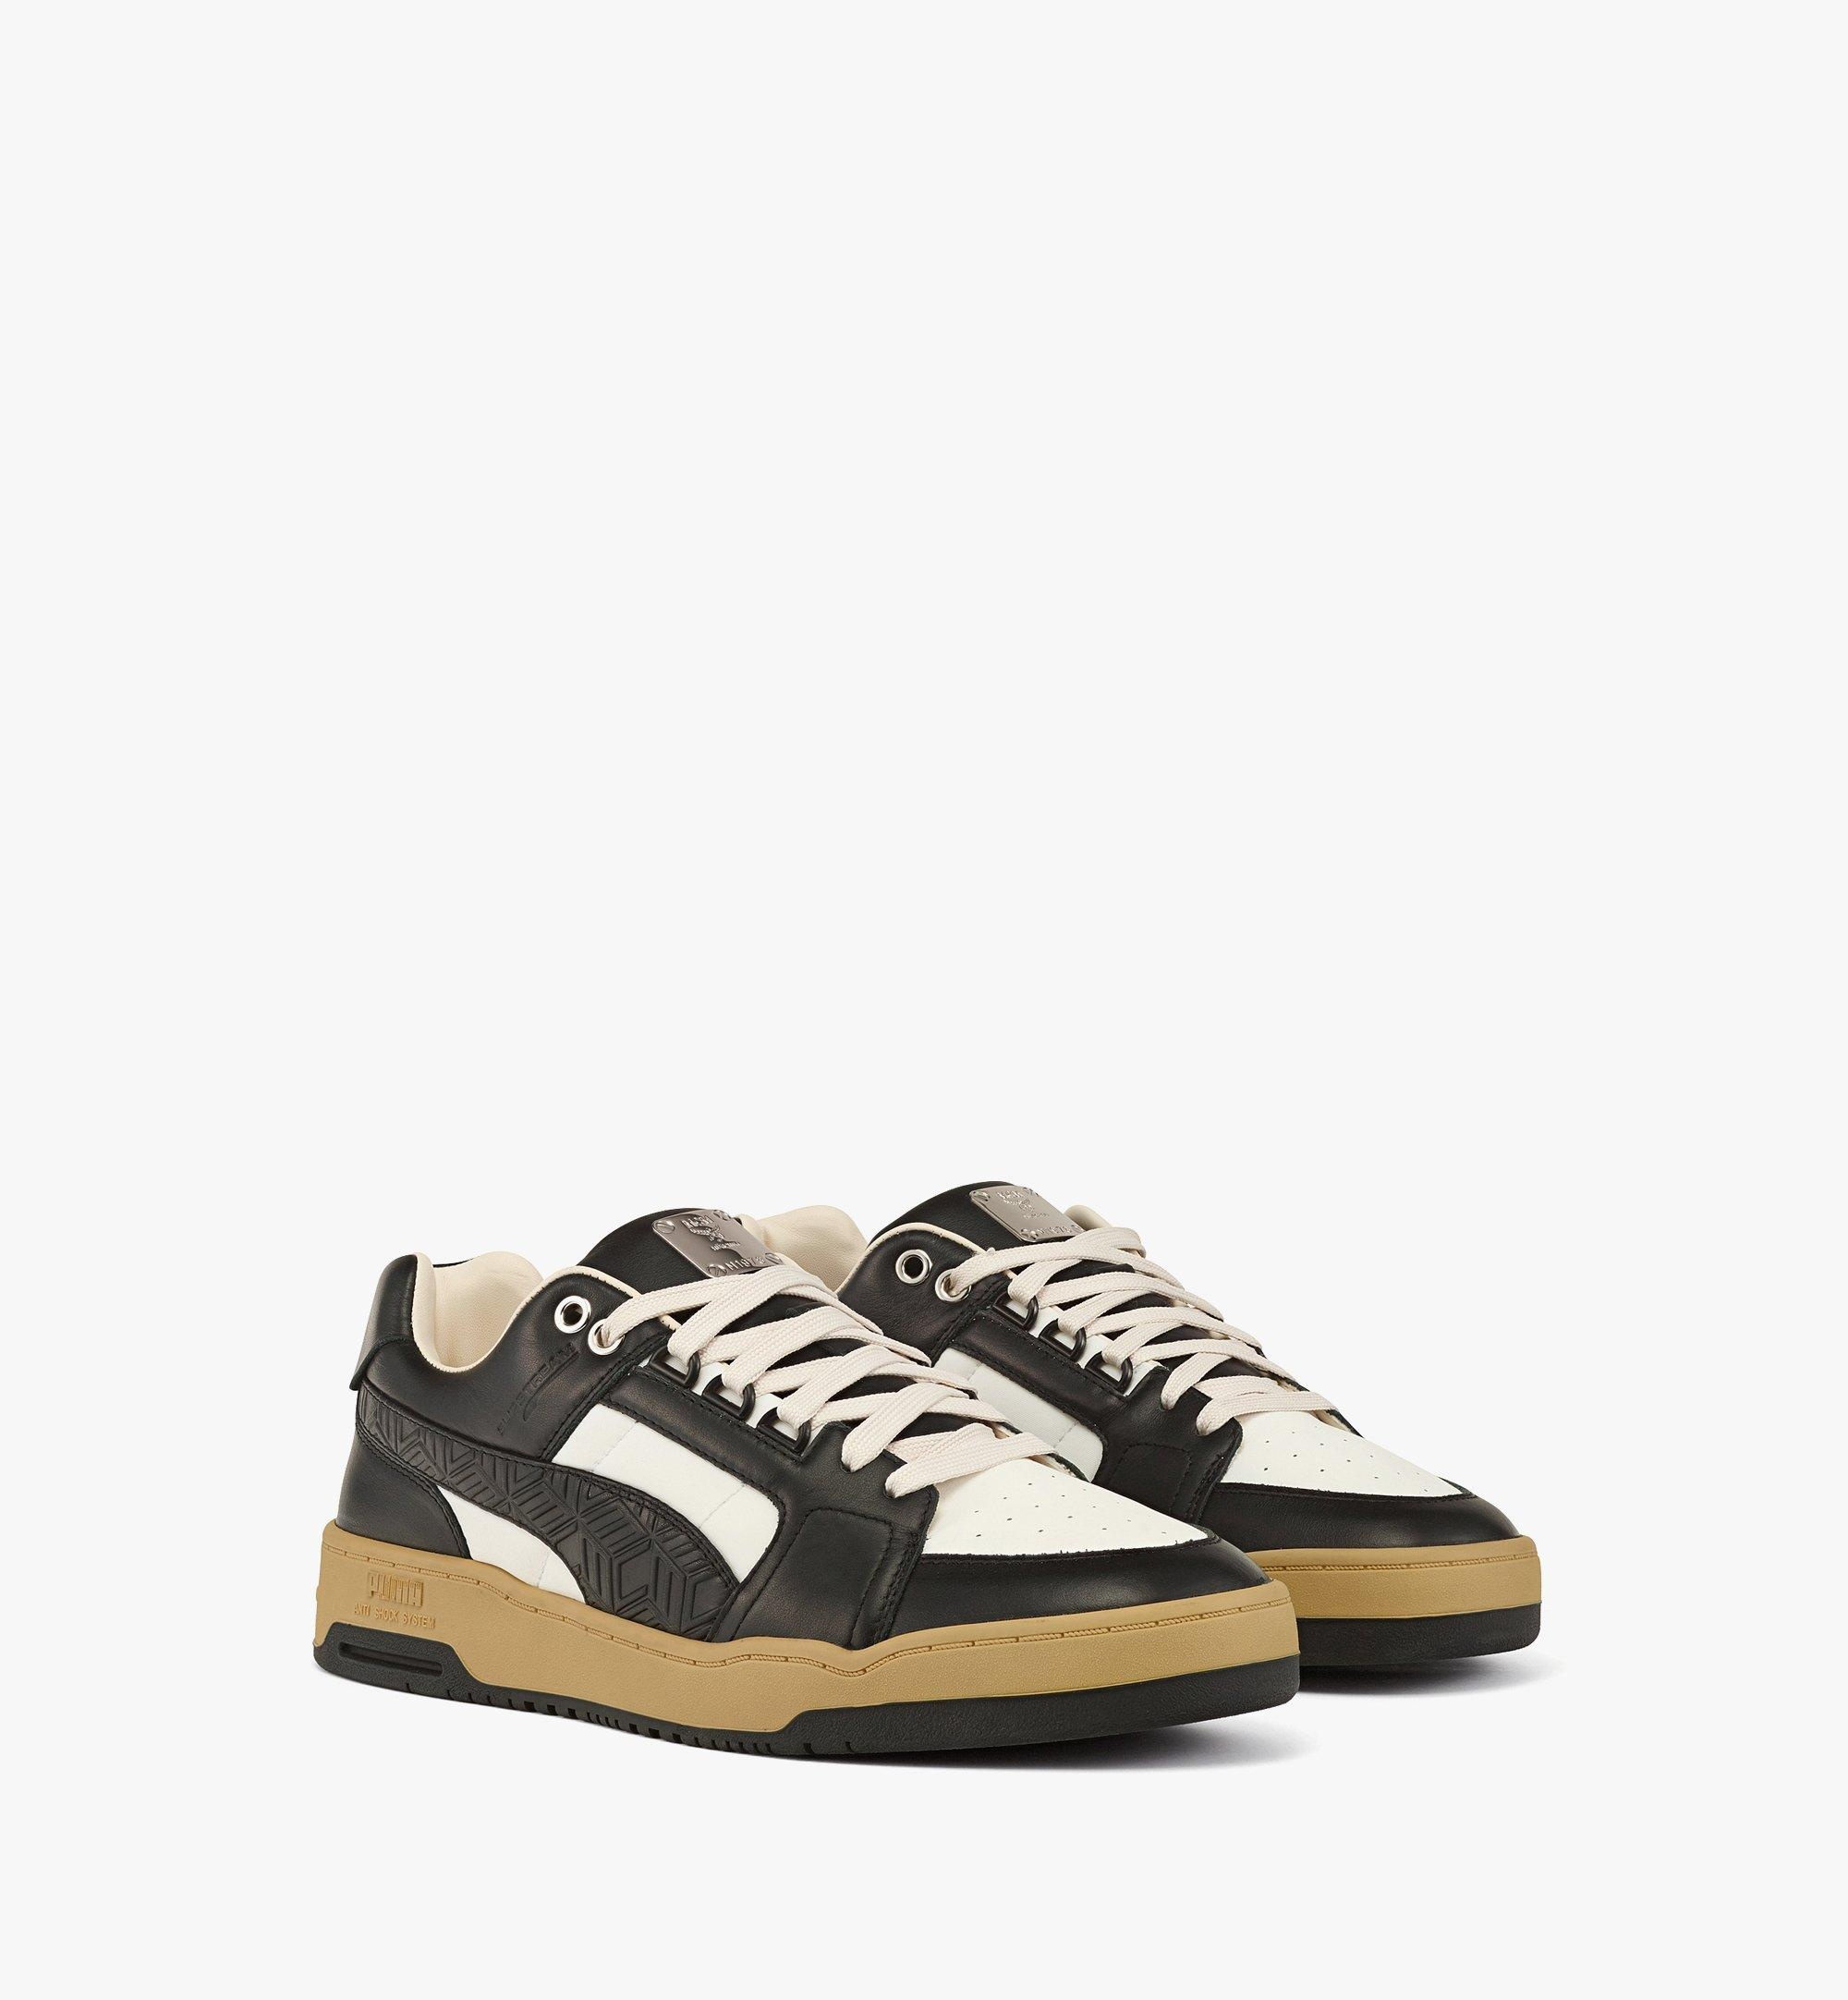 MCM x PUMA Slipstream Sneakers in Cubic Leather - 1